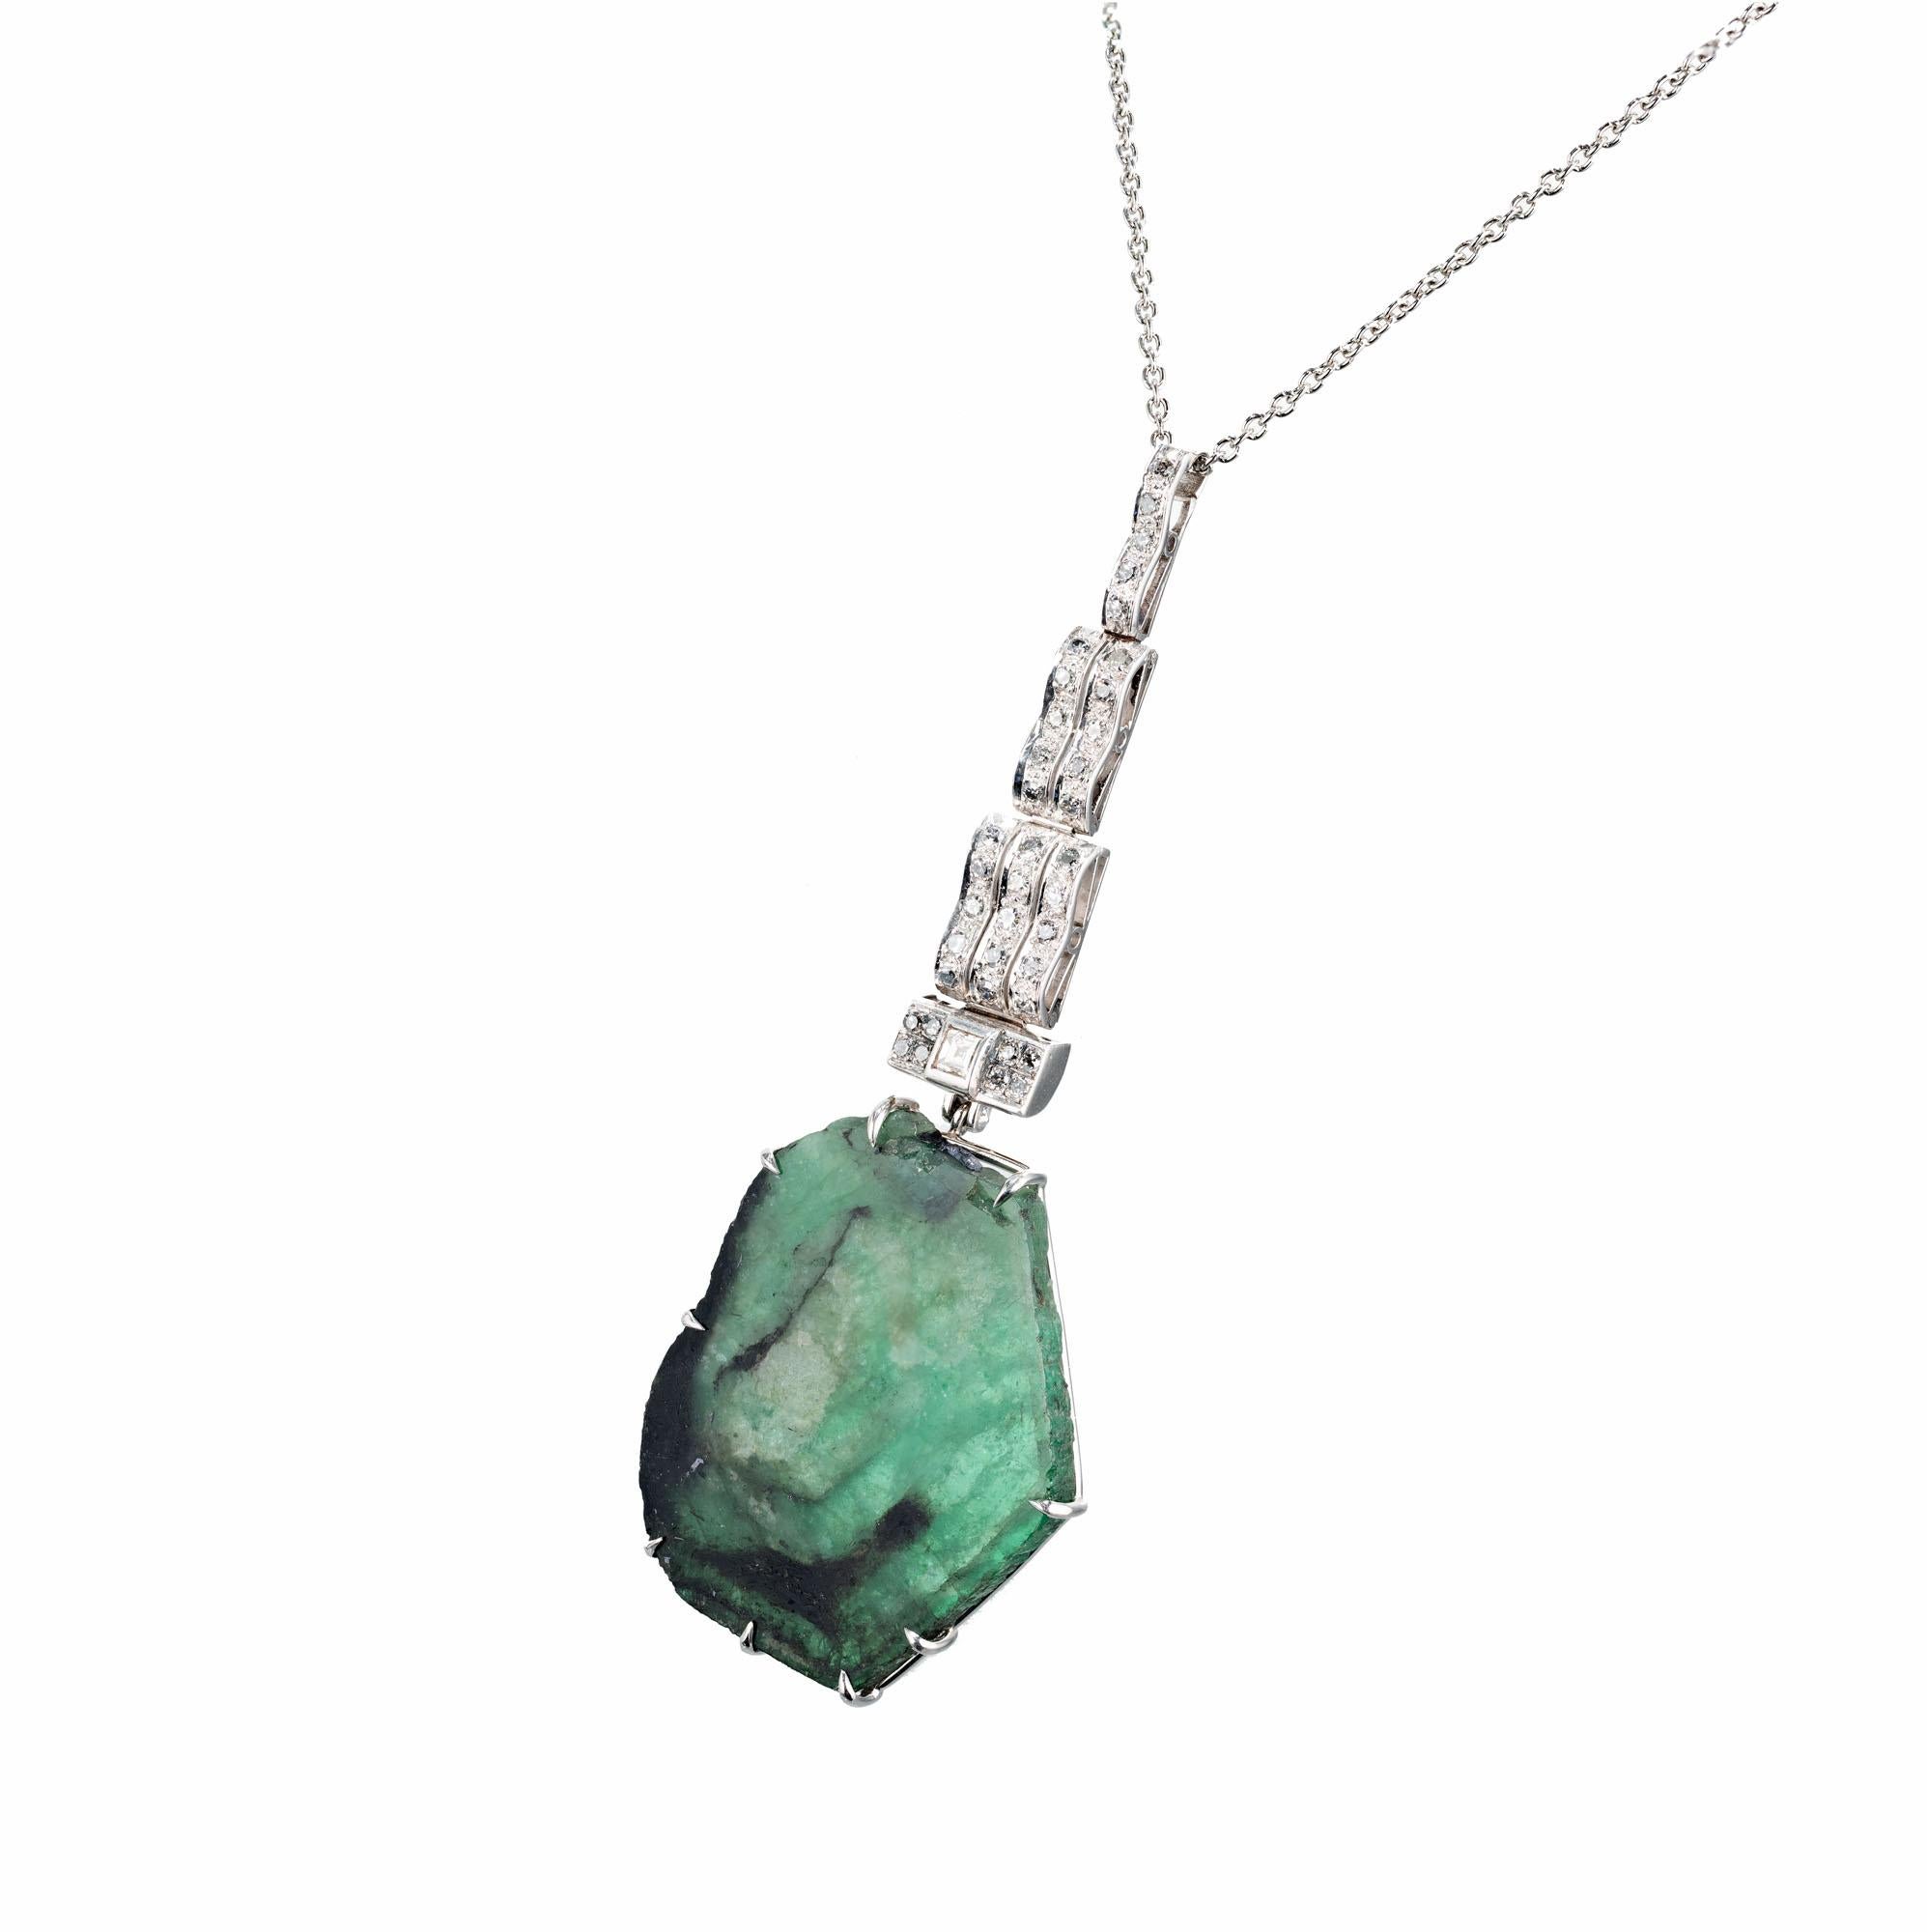 Art Deco Translucent natural Emerald crystal slice dangling from a hinged wavy handmade Platinum top. Accented with 44 round diamonds on a platinum chain. 

1 Natural untreated Emerald crystal slice, approx. total weight 38.00cts
44 single cut